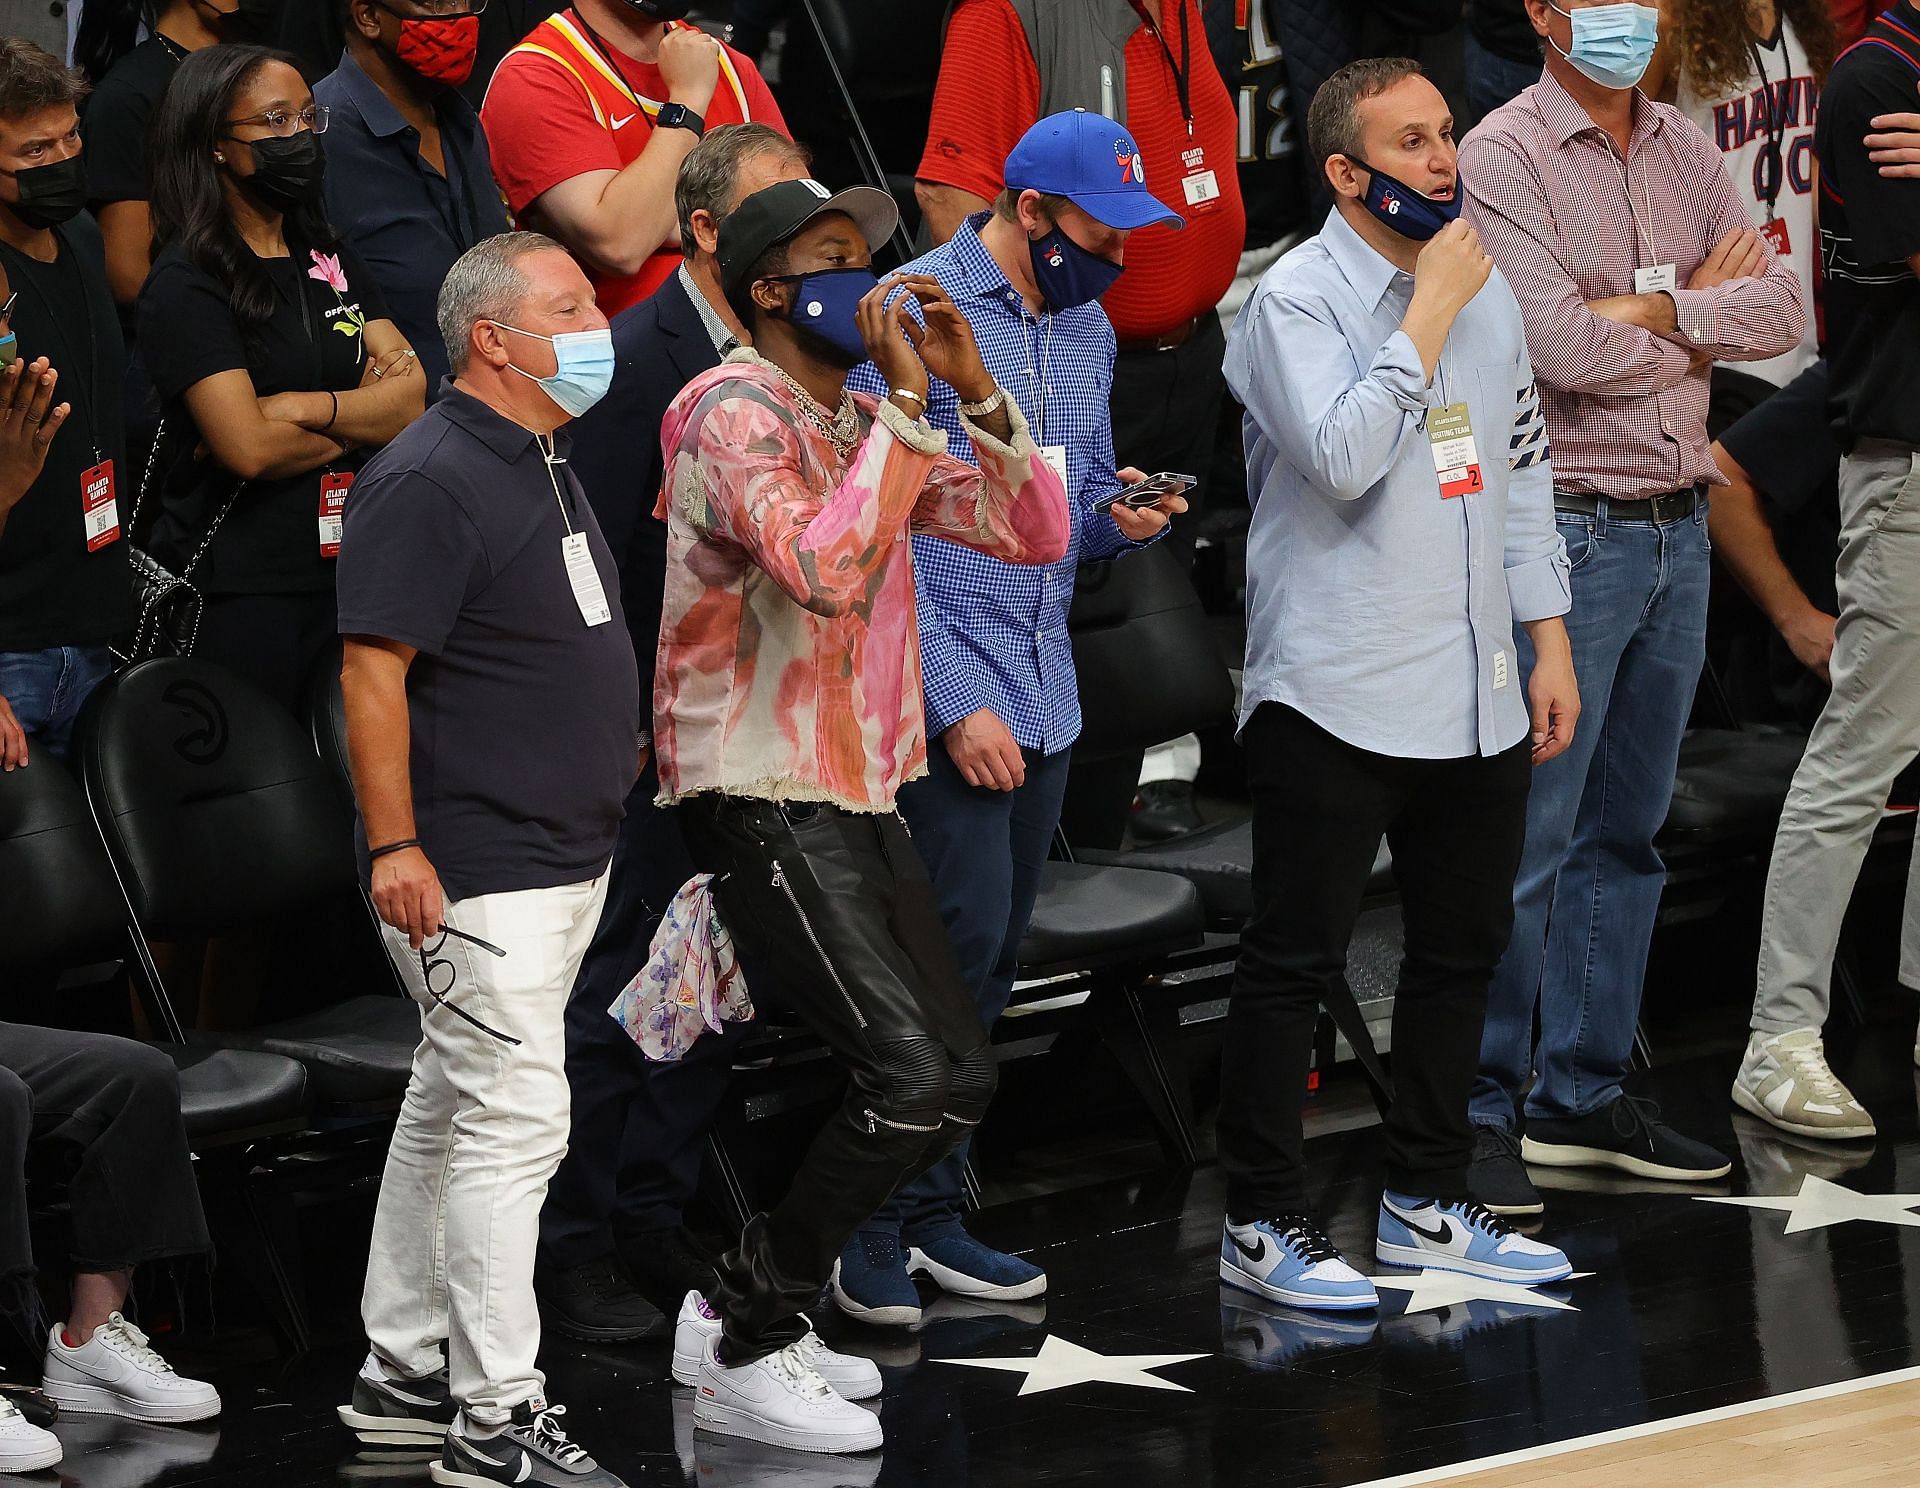 Rapper, Meek Mill, looks on during the second half of game 6 of the Eastern Conference Semifinals between the Atlanta Hawks and the Philadelphia 76ers at State Farm Arena on June 18, 2021 in Atlanta, Georgia.